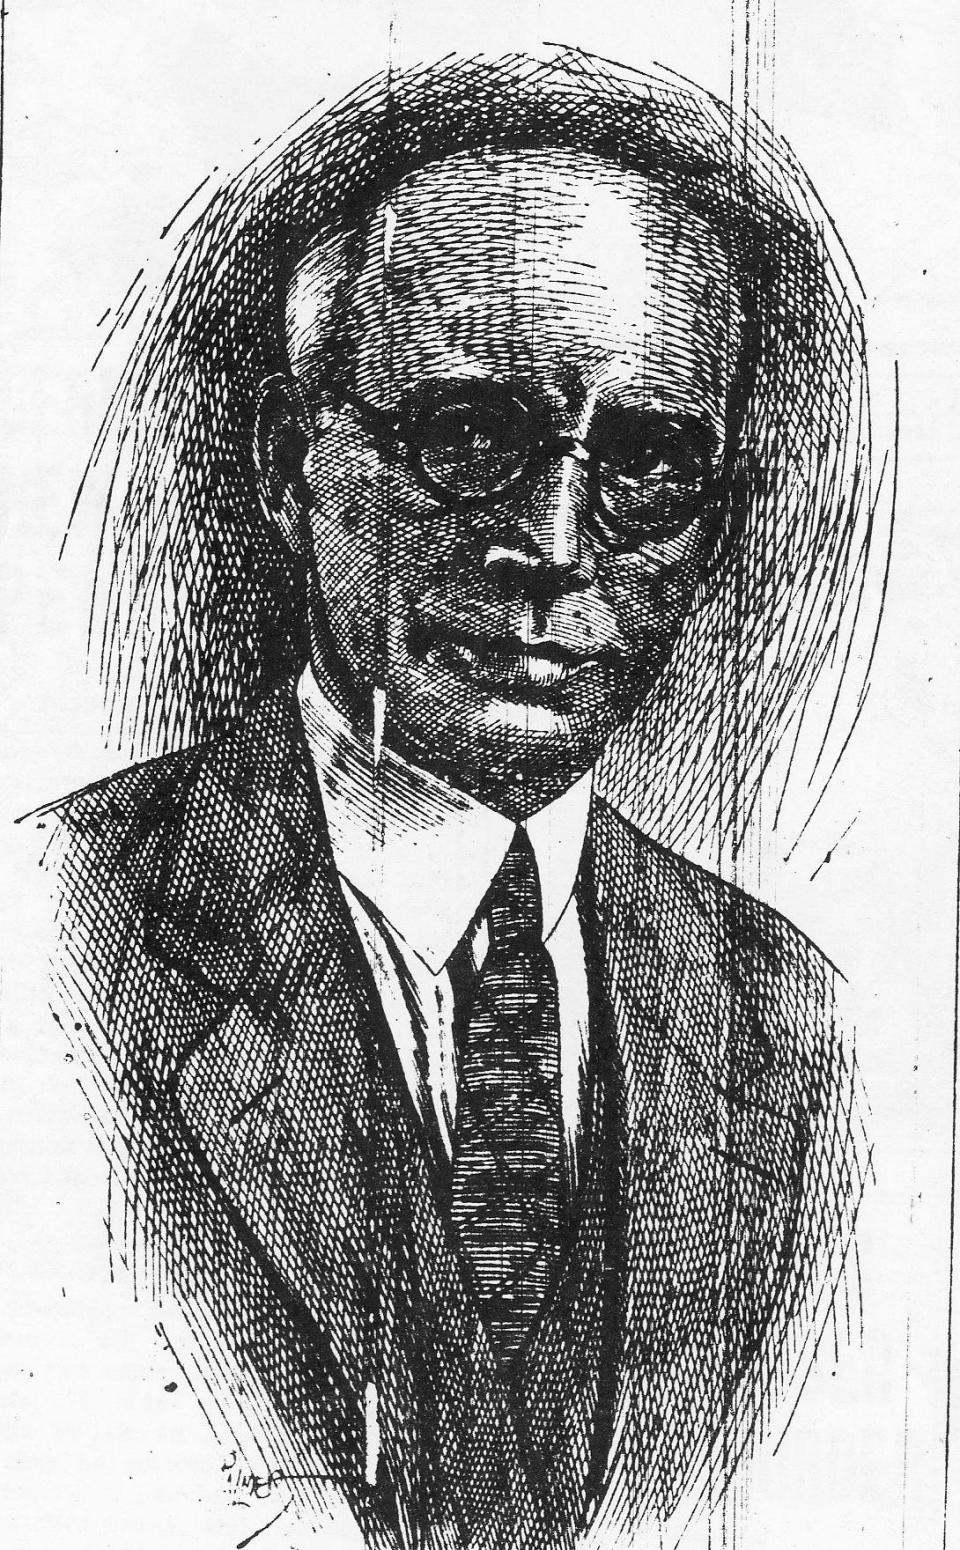 A 1920s pen and ink drawing of Thomas Reed Martin. Brought to Sarasota by Bertha Palmer to design her home, Martin went on to become one of the city’s most prolific architects.